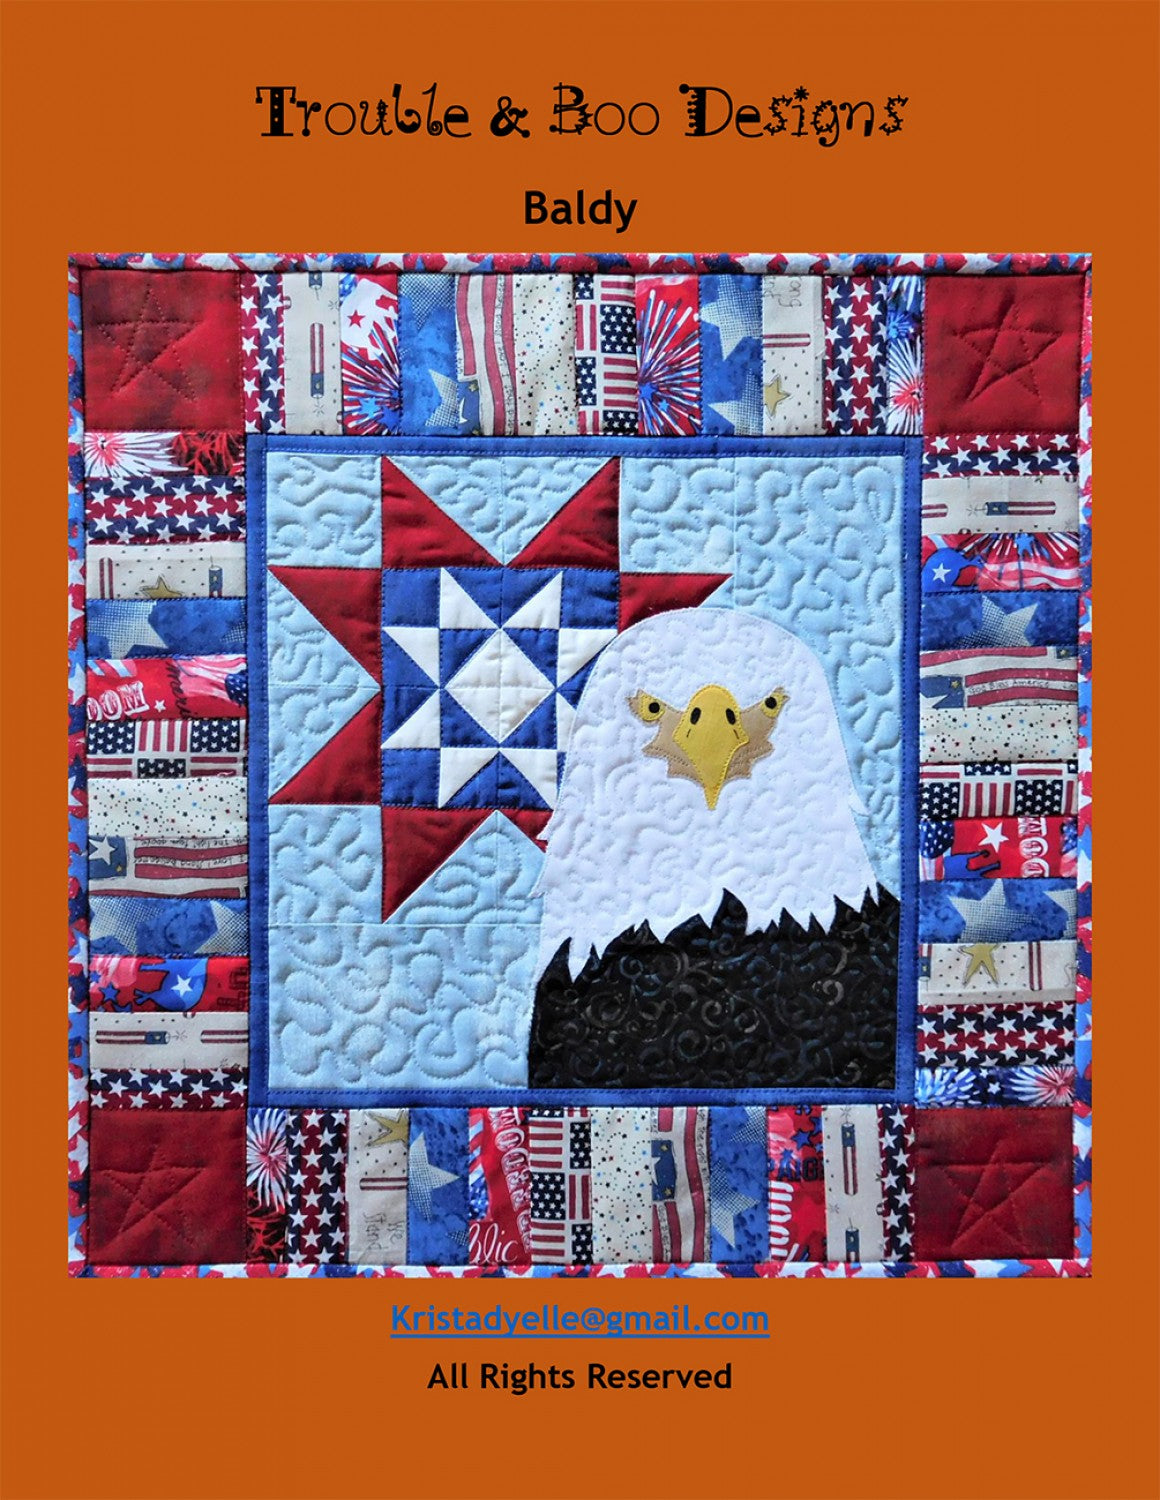 Baldy Quilt Pattern by Trouble and Boo Designs